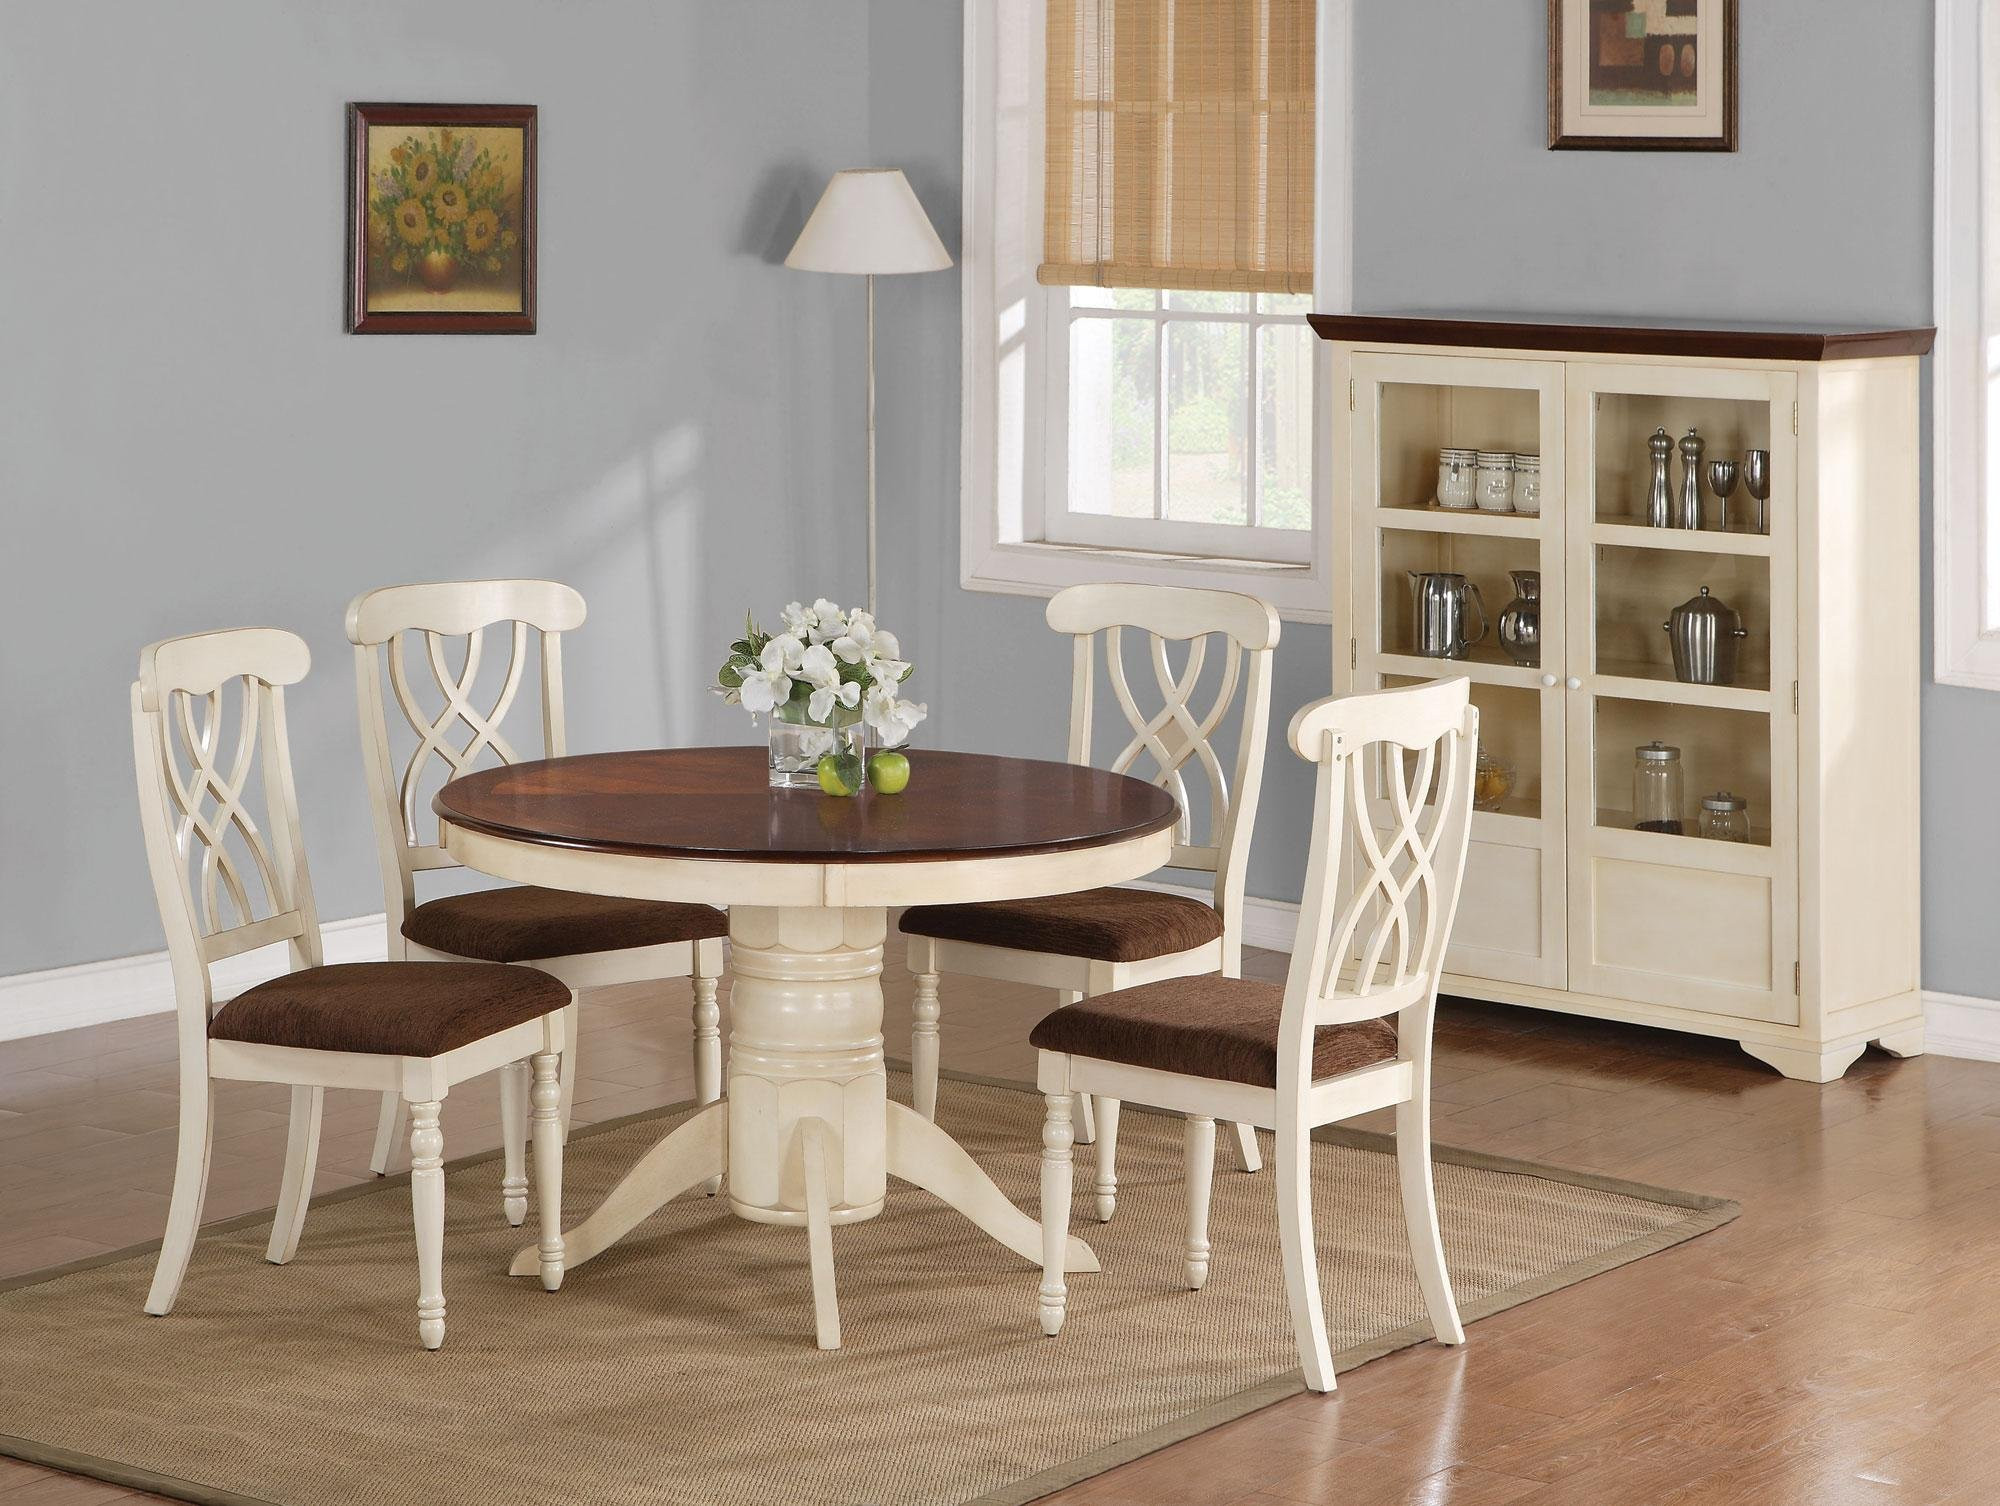 Kitchen Table Sets White
 Beautiful White Round Kitchen Table and Chairs